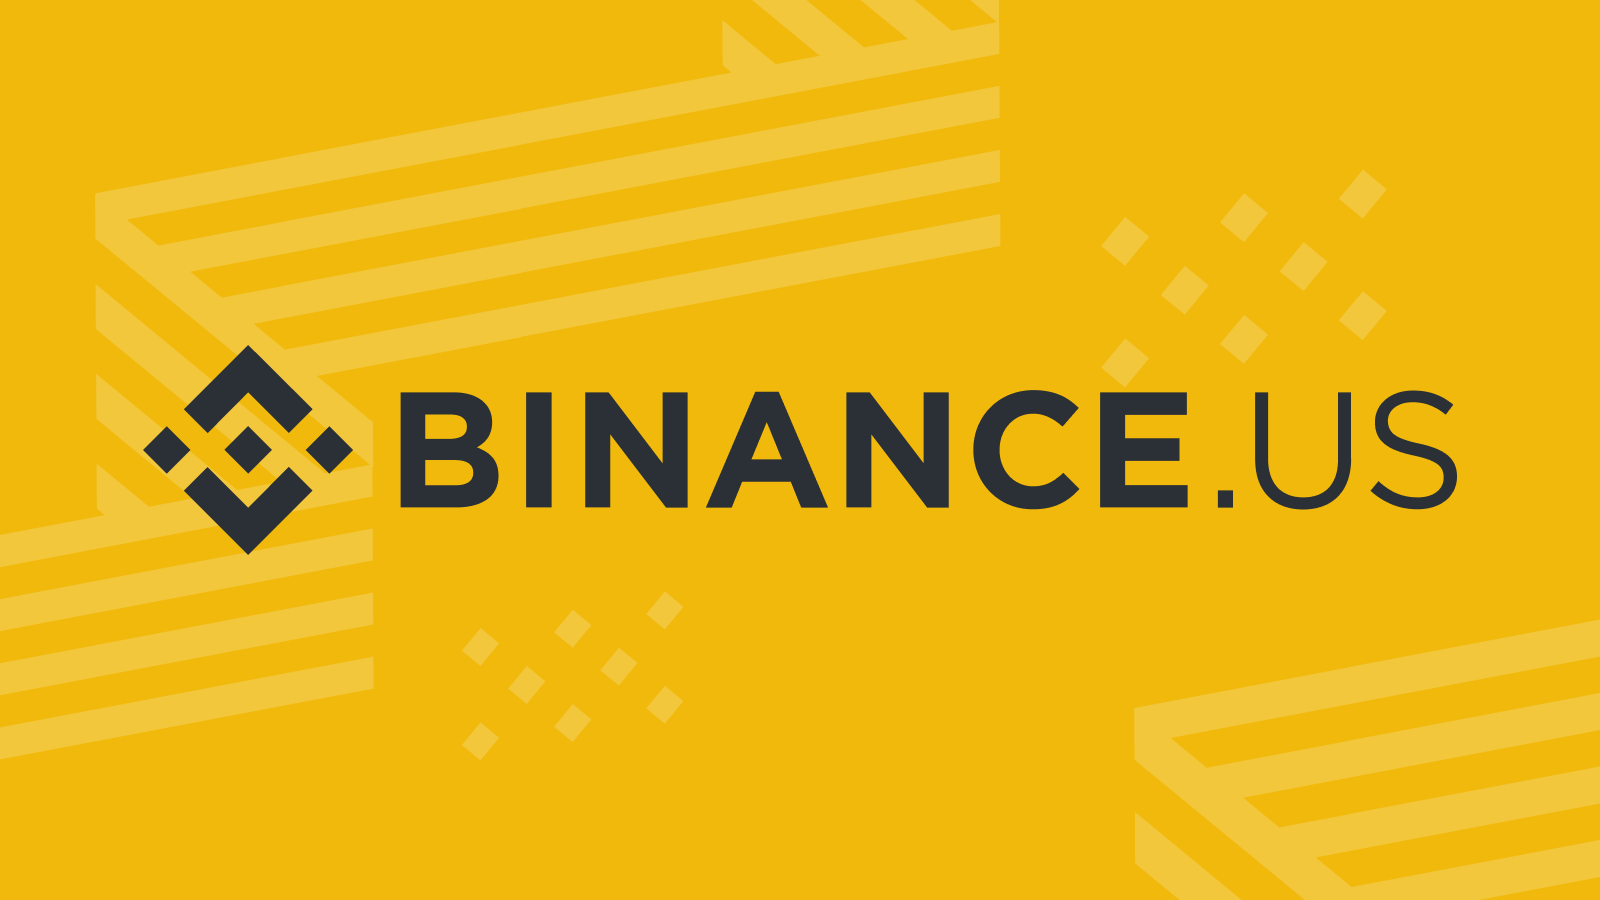 Binance.US has launched in two new U.S. territories